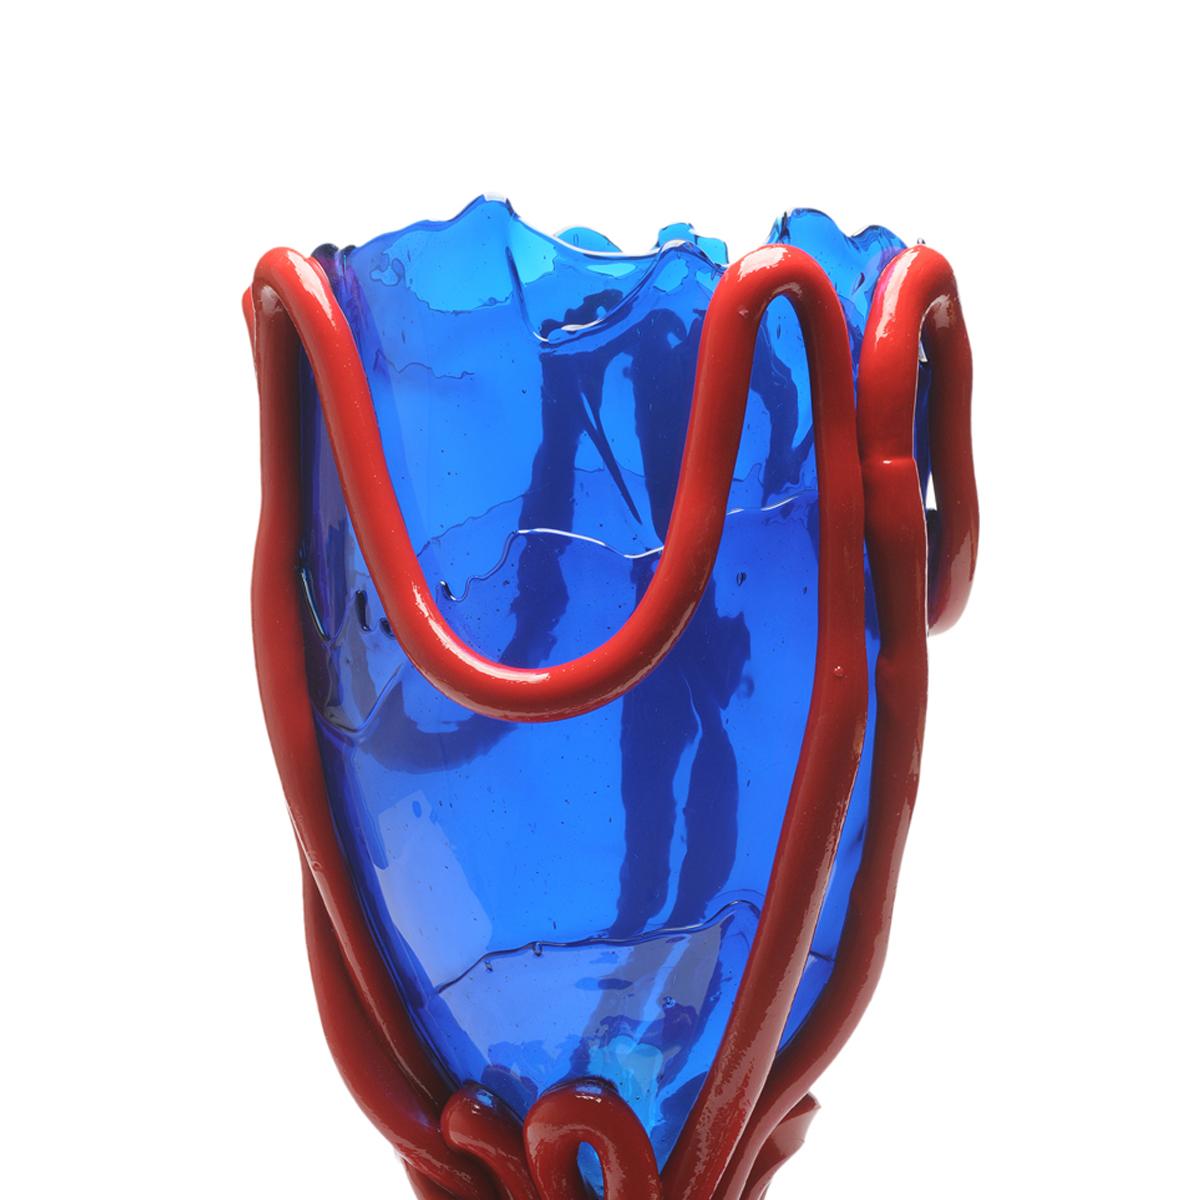 Indian Summer vase, clear blue, matt red

Vase in soft resin designed by Gaetano Pesce in 1995 for Fish Design collection.
Measures: M - ø 16cm x H 26cm
Other sizes available.
Colours: clear blue, matt red

Other sizes available.
Vase in soft resin